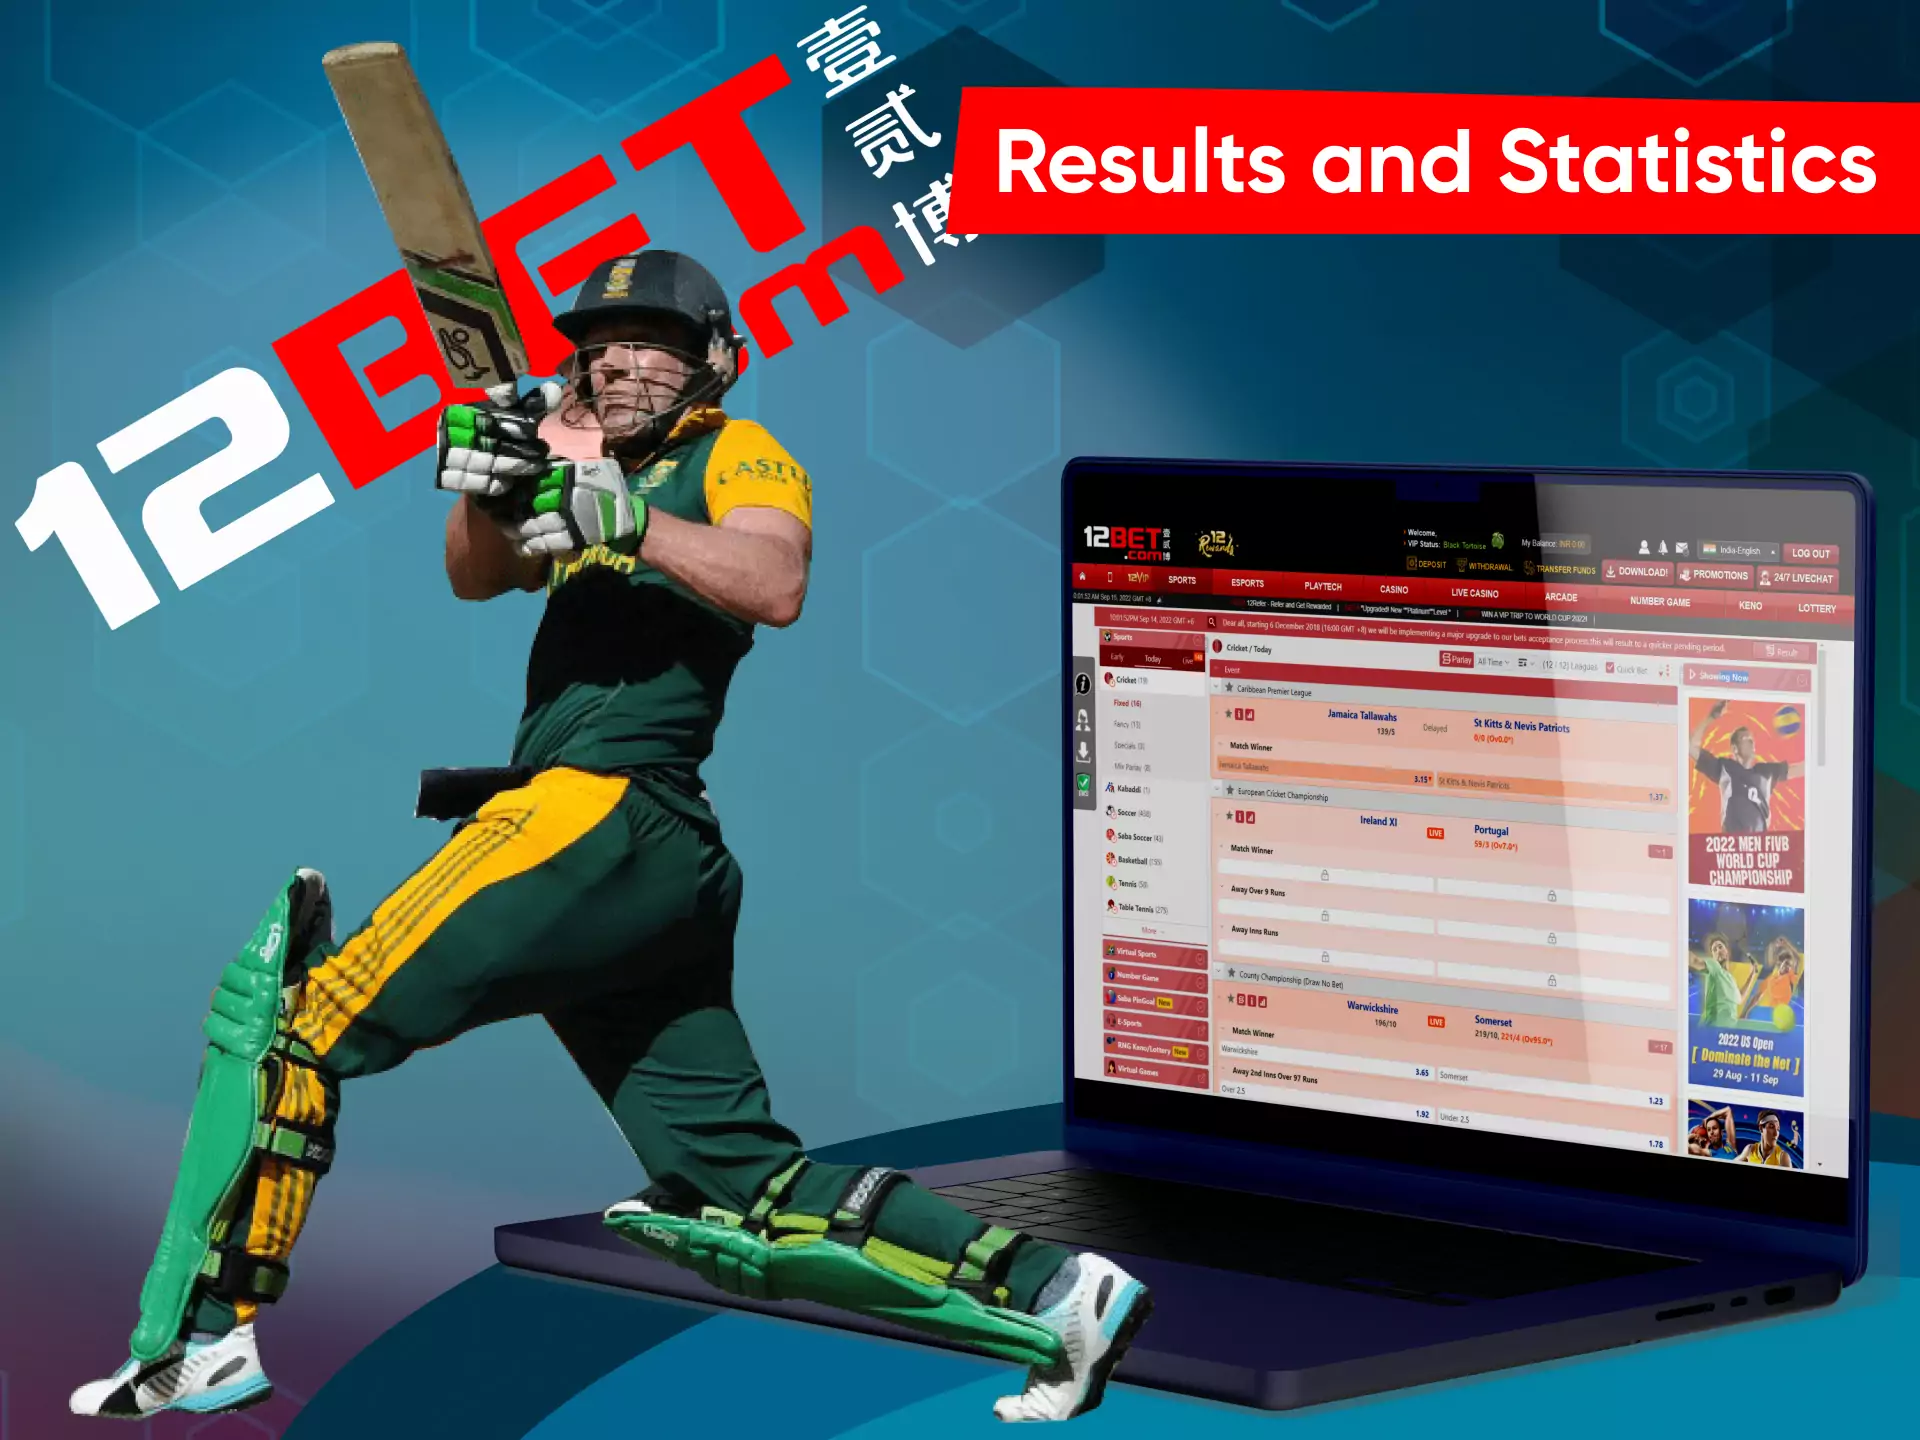 You can check the results of matches right on the 12bet website.